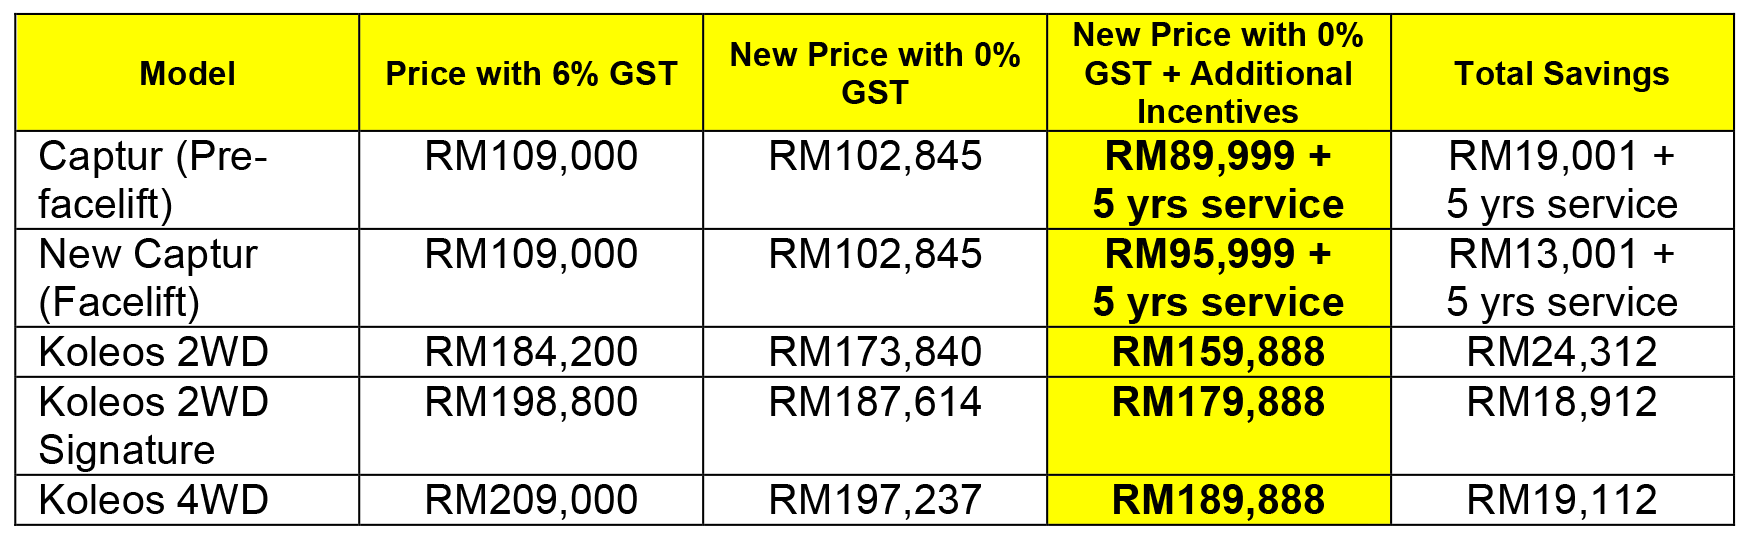 RENAULT’S NEW GST ZERO-RATED PRICES AND ADDITIONAL REBATES